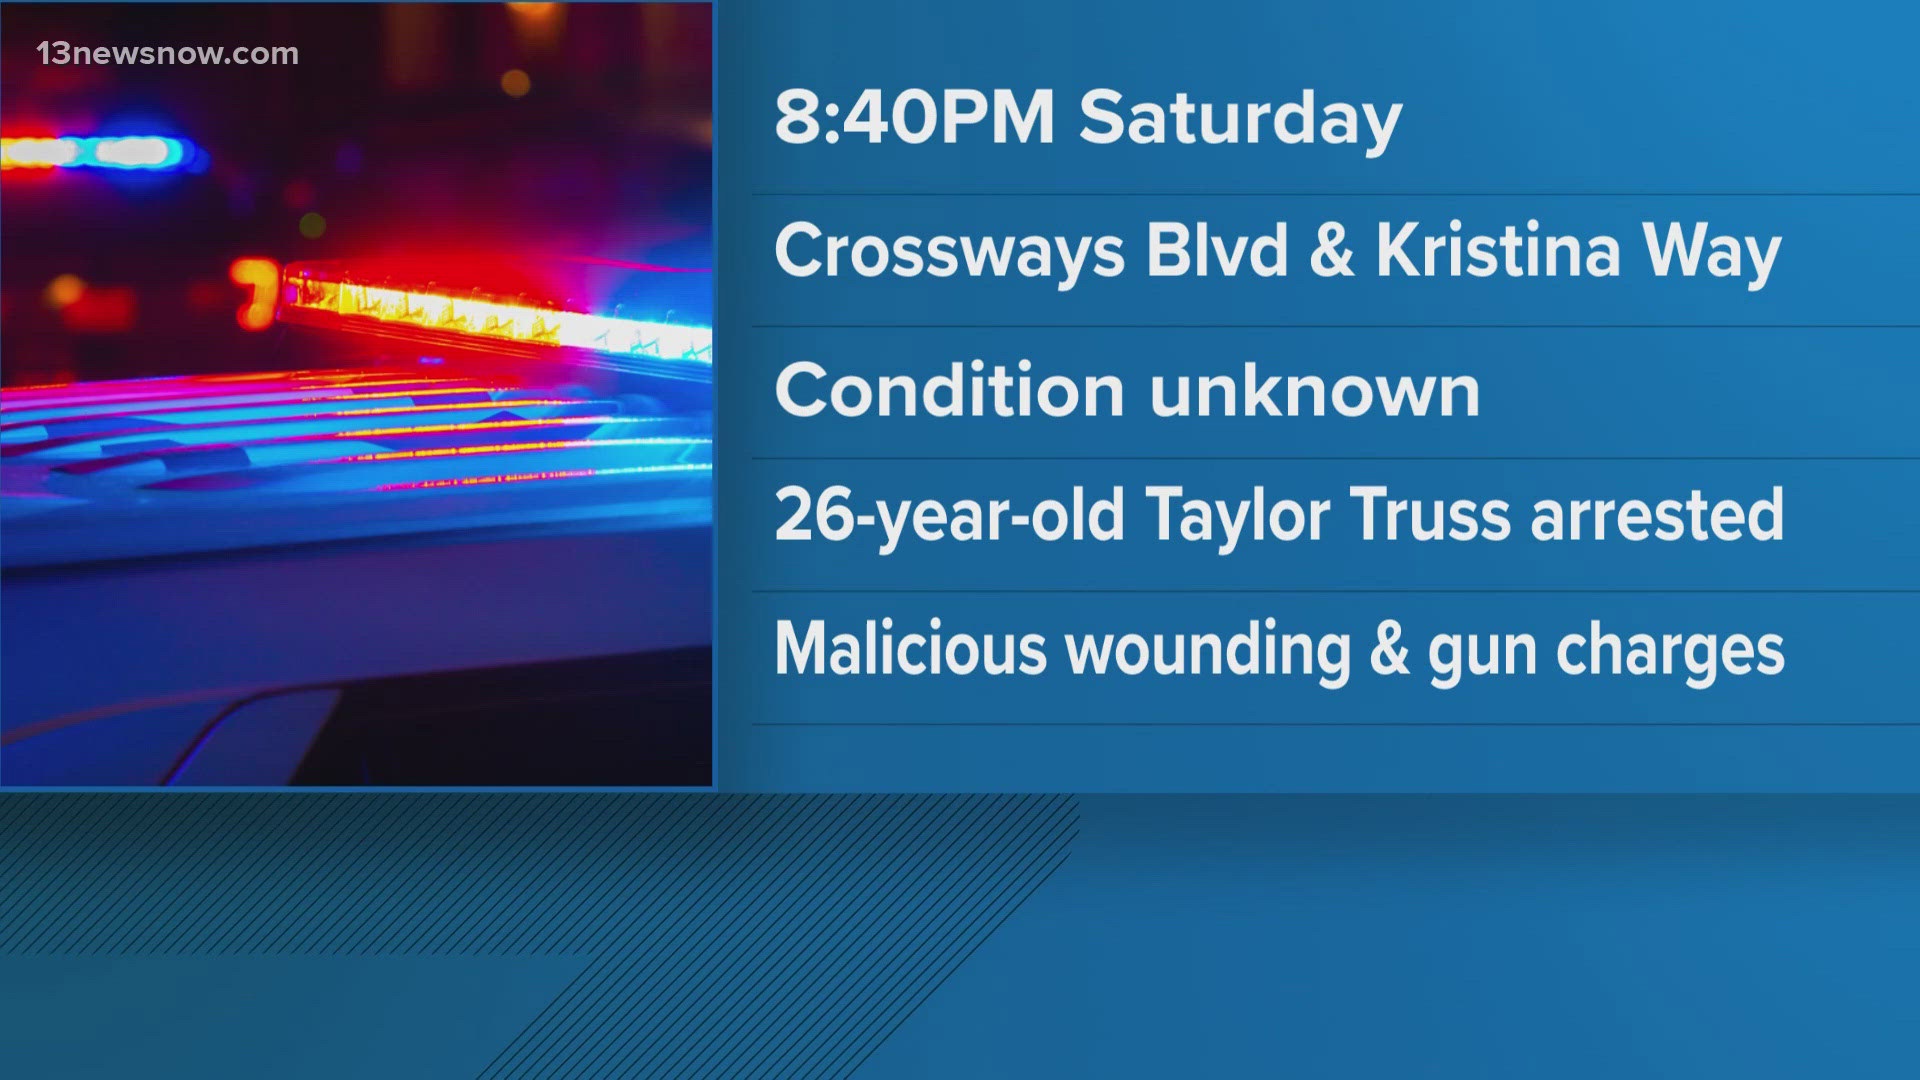 The stabbing happened near the intersection of Crossways Boulevard and Kristina Way on Saturday night.